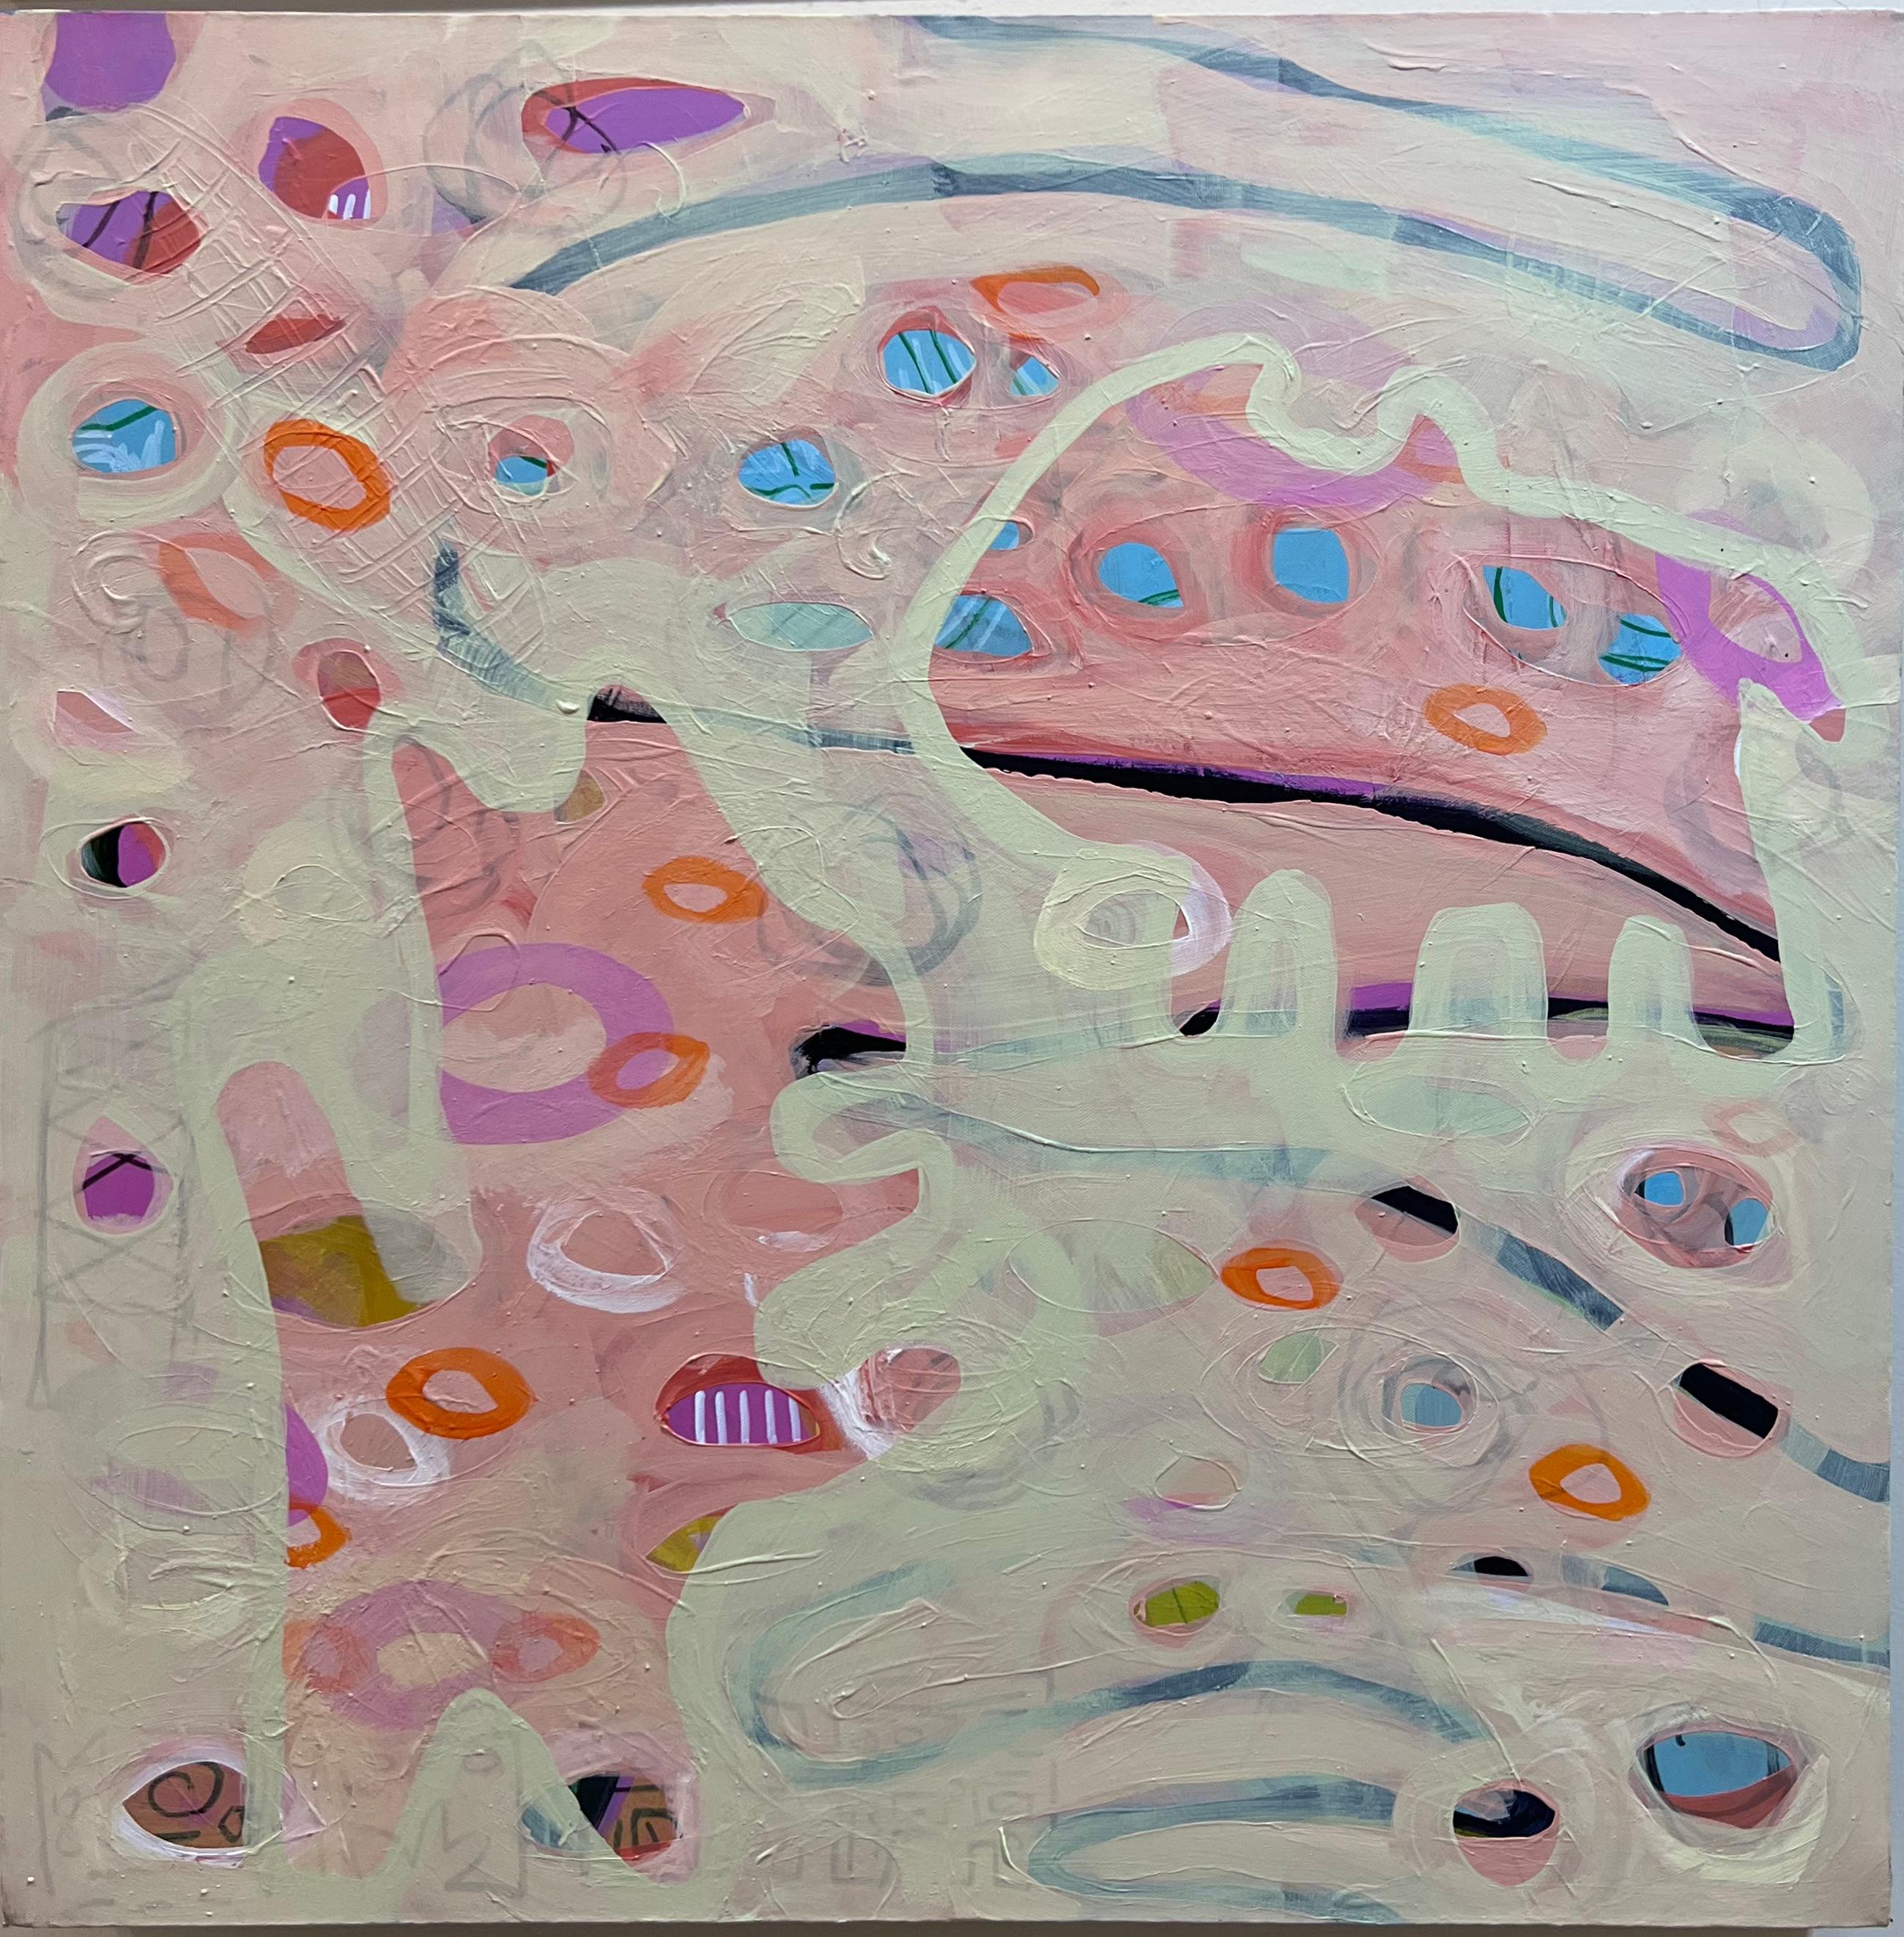 Seed Pod in Spring Shower, by Melanie Yazzie, painting, dogs, abstract, pink

Melanie Yazzie works in a wide range of media that include printmaking, painting, sculpting, and ceramics, as well as installation art. Her art is accessible to the public